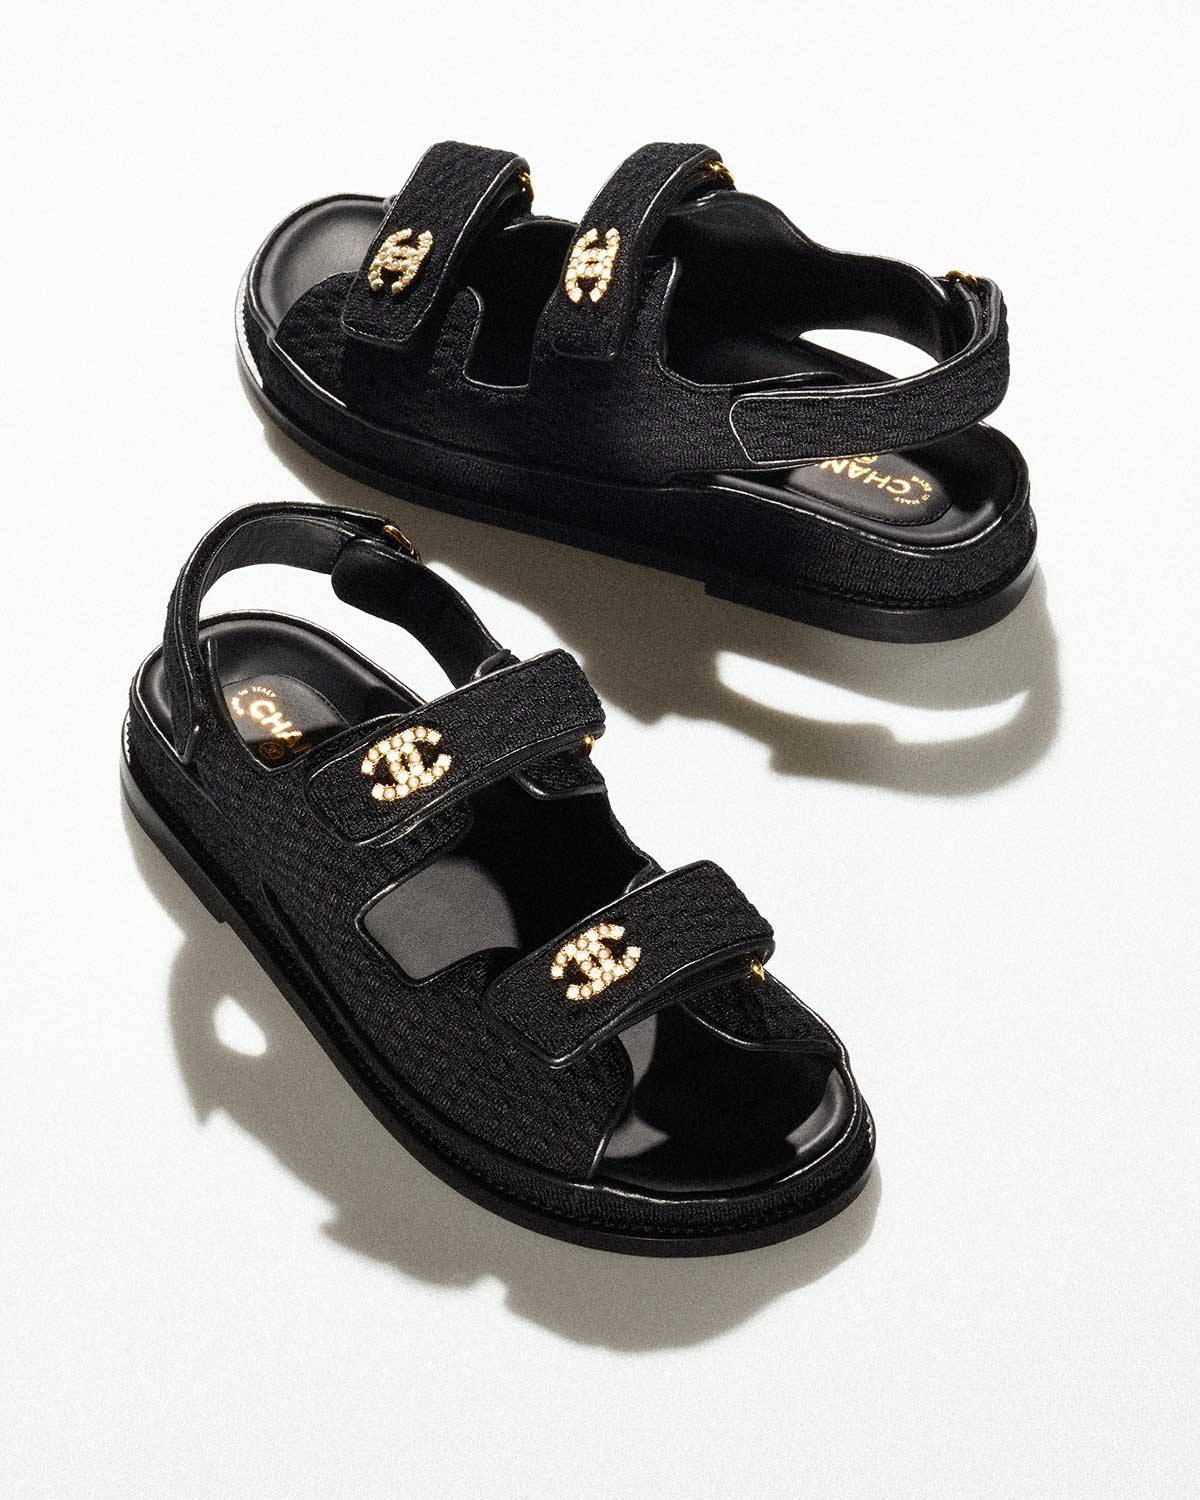 Chanel's Dad Sandal Trend Inspired Luxury Shoe Dupes